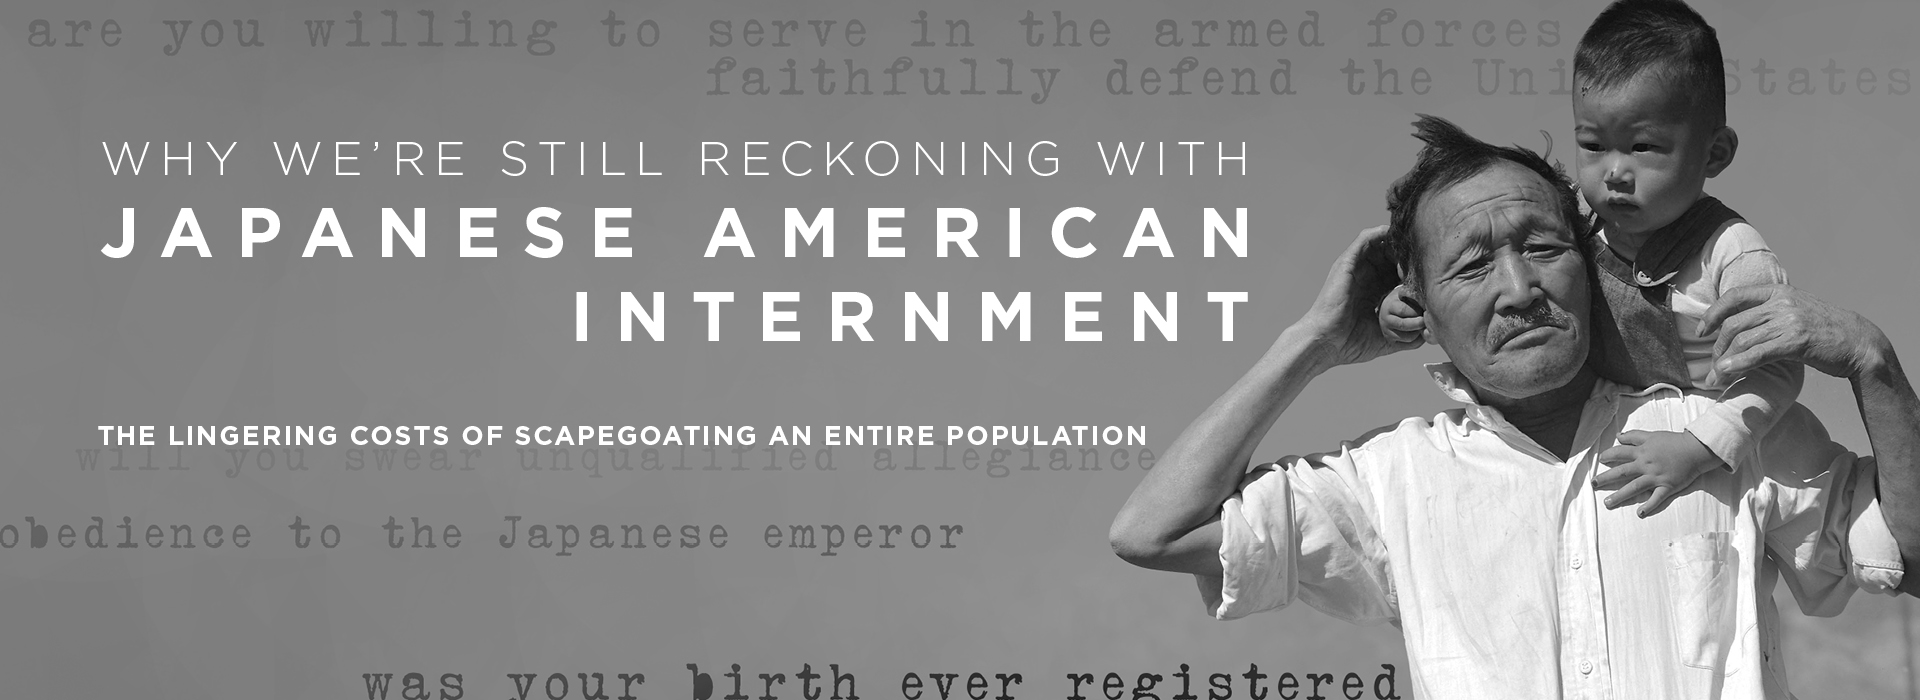 Why We’re Still Reckoning With Japanese American Internment